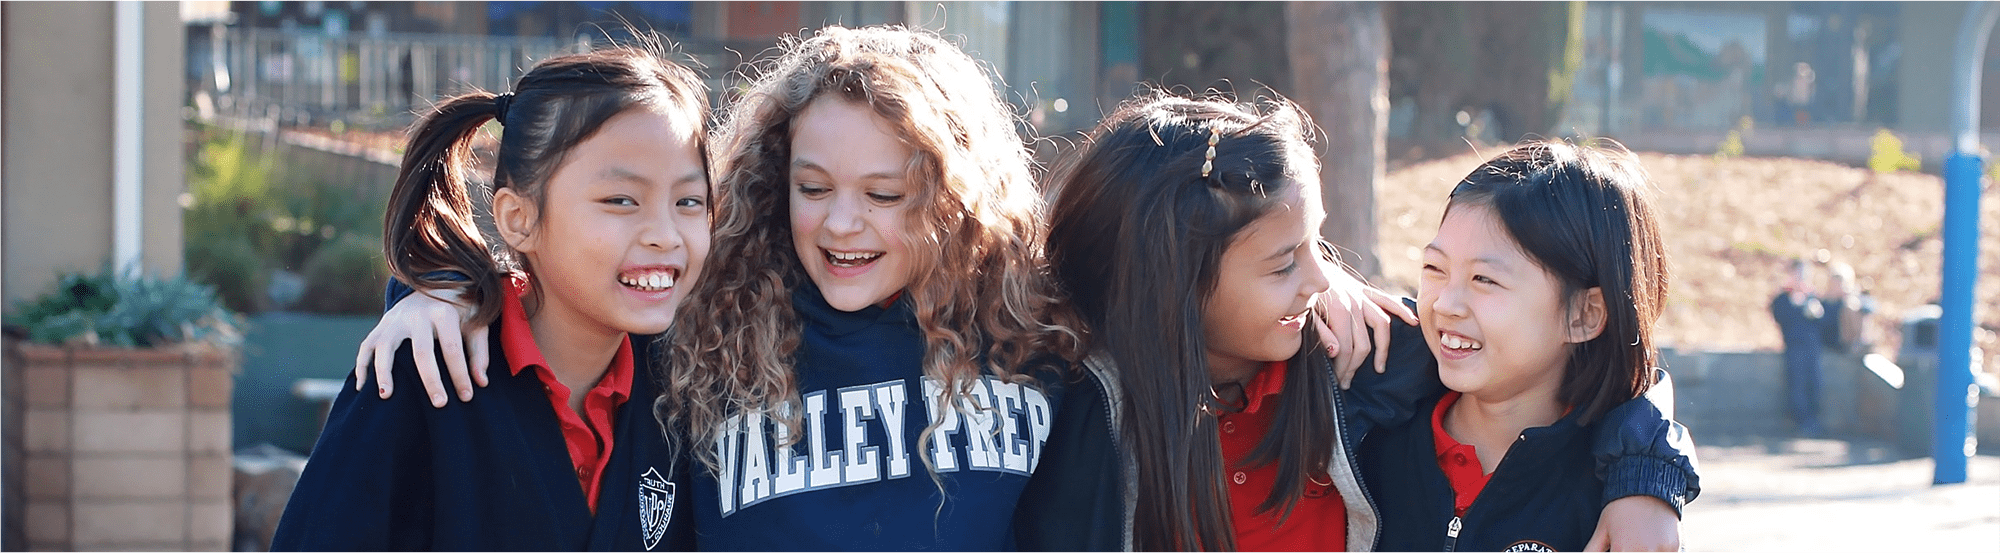 Female students laugh together